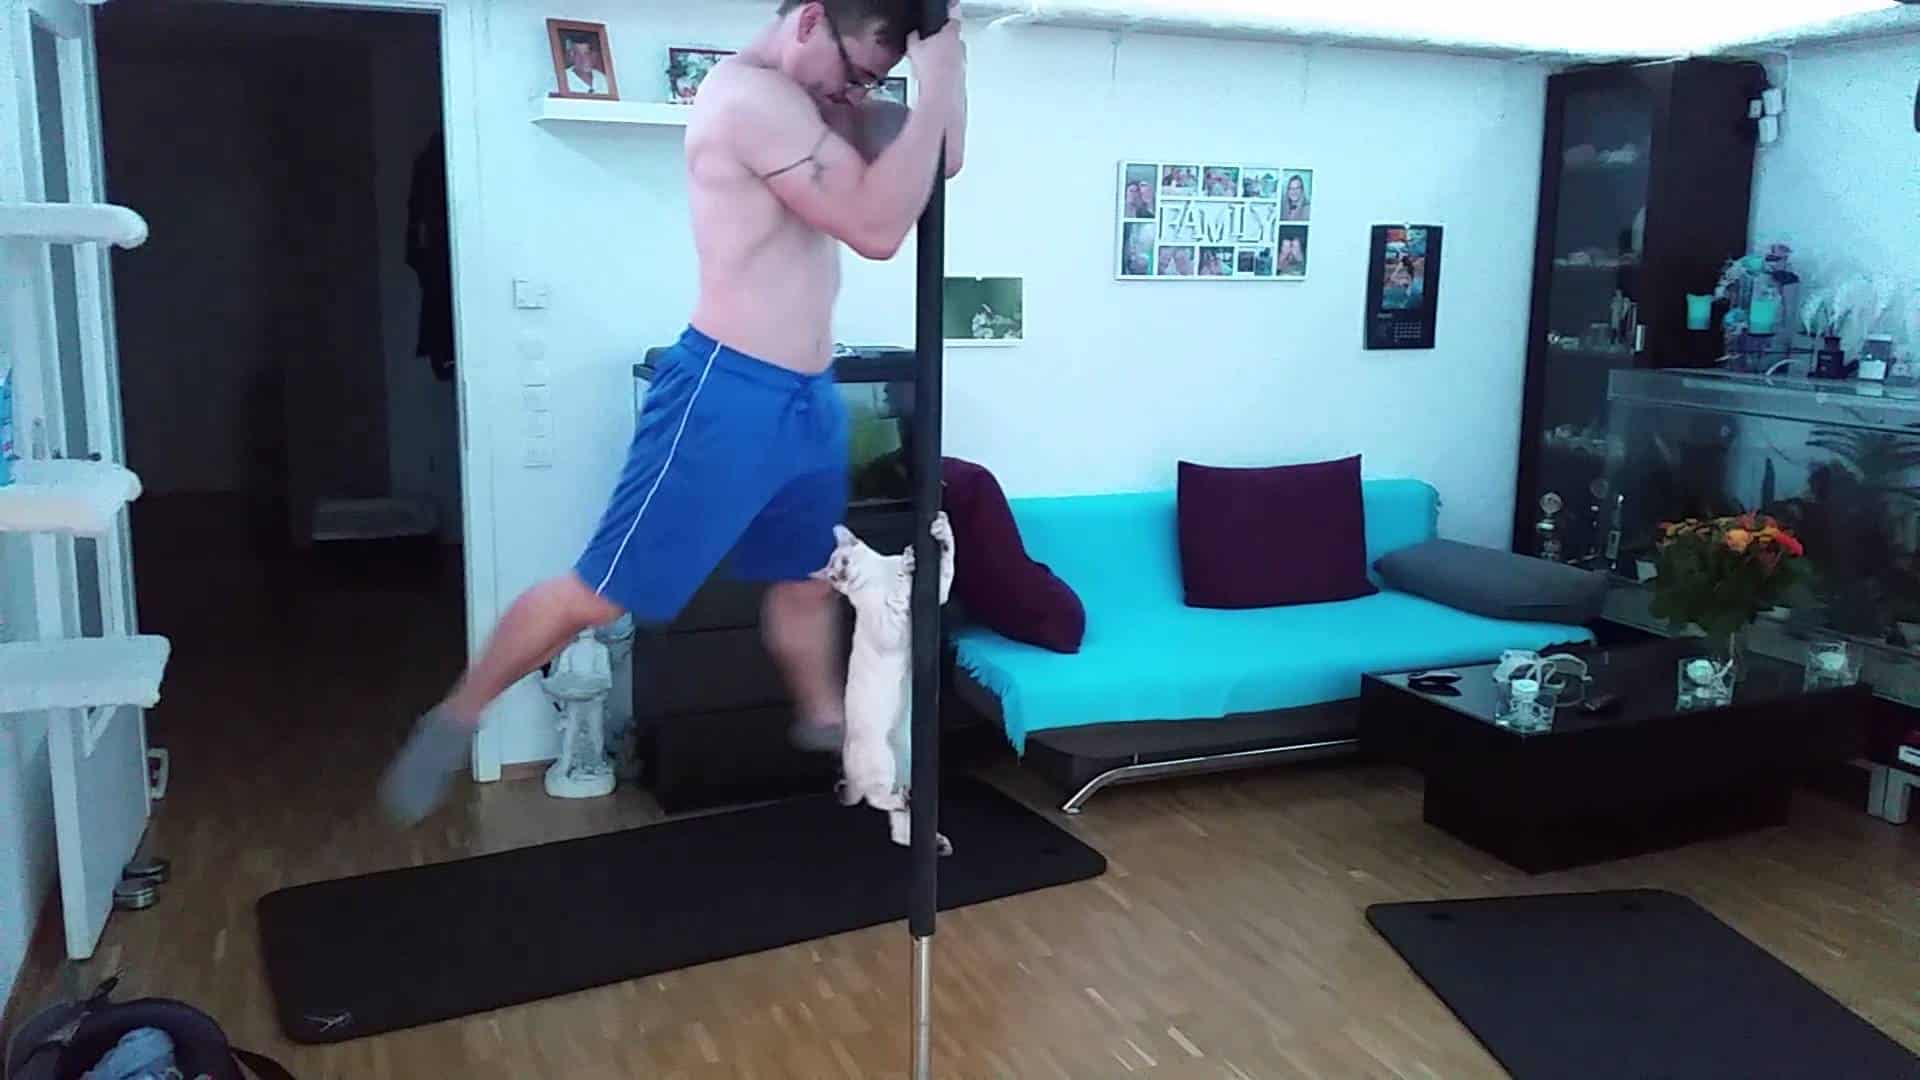 Pole dance: this cat shows what it can do on the pole.